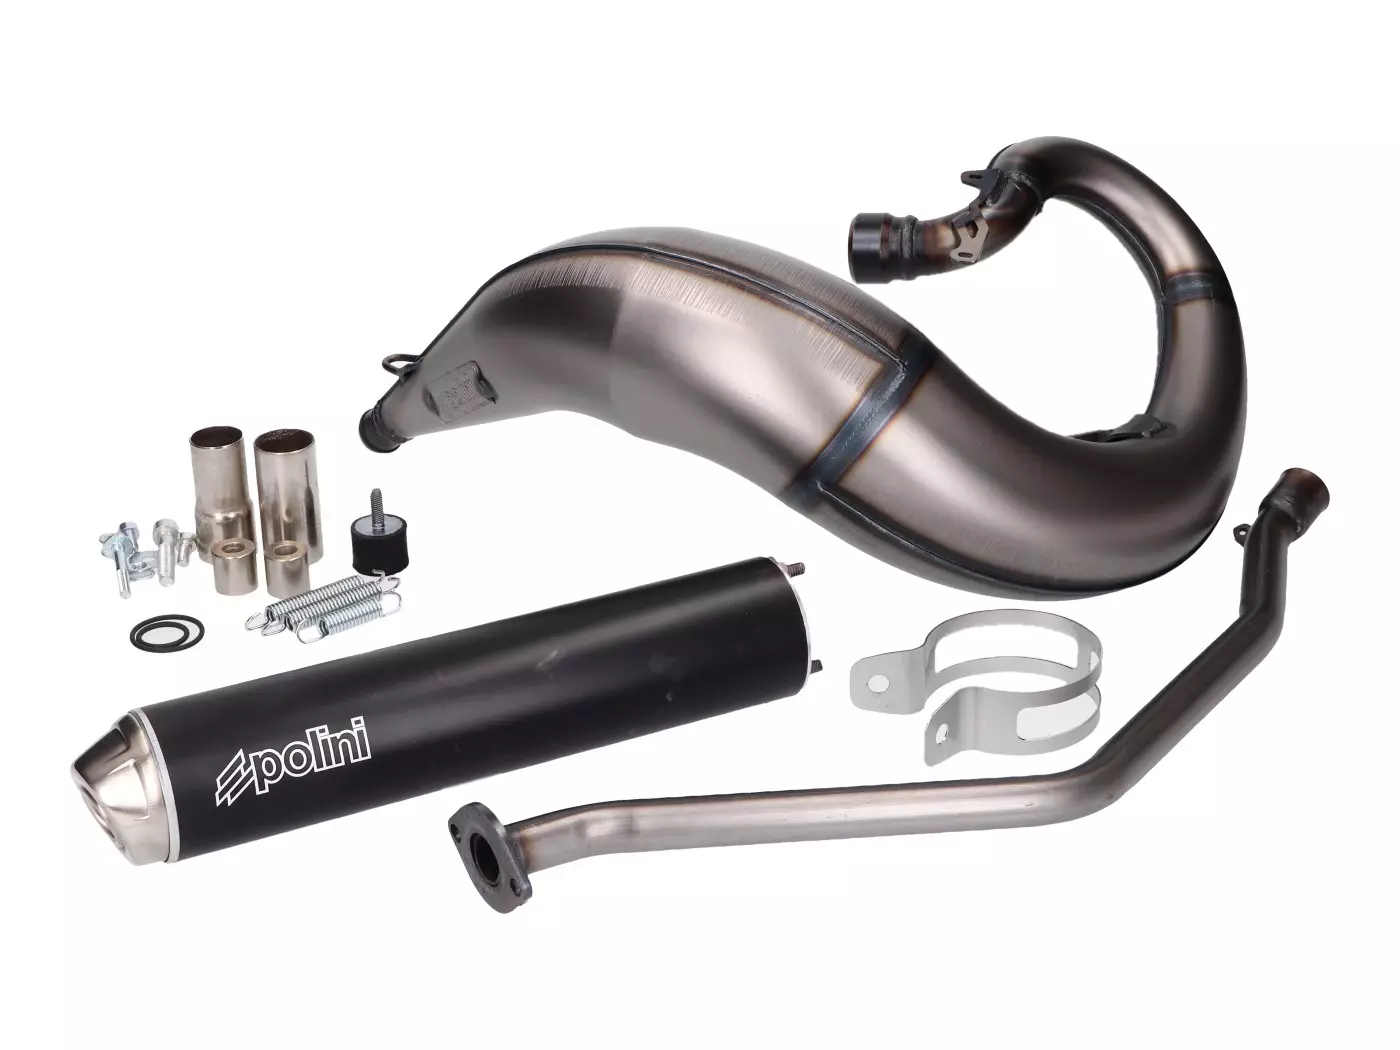 Exhaust Polini For Race For HM Moto Baja 50 RR (AM6)